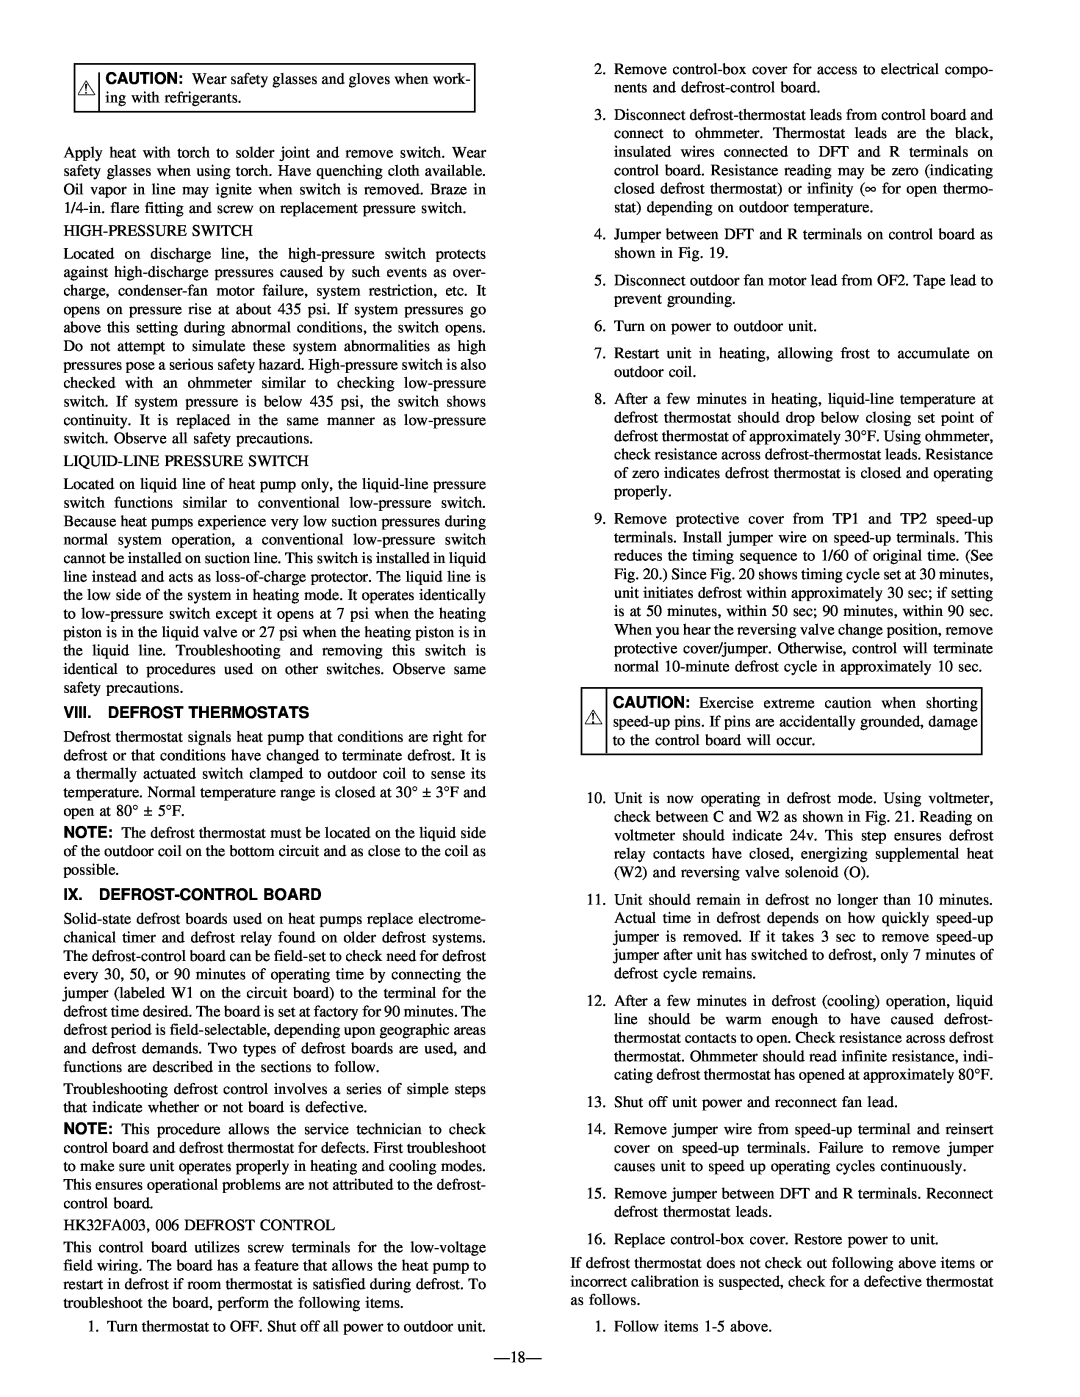 Bryant R-22 service manual Viii. Defrost Thermostats, Ix. Defrost-Controlboard 